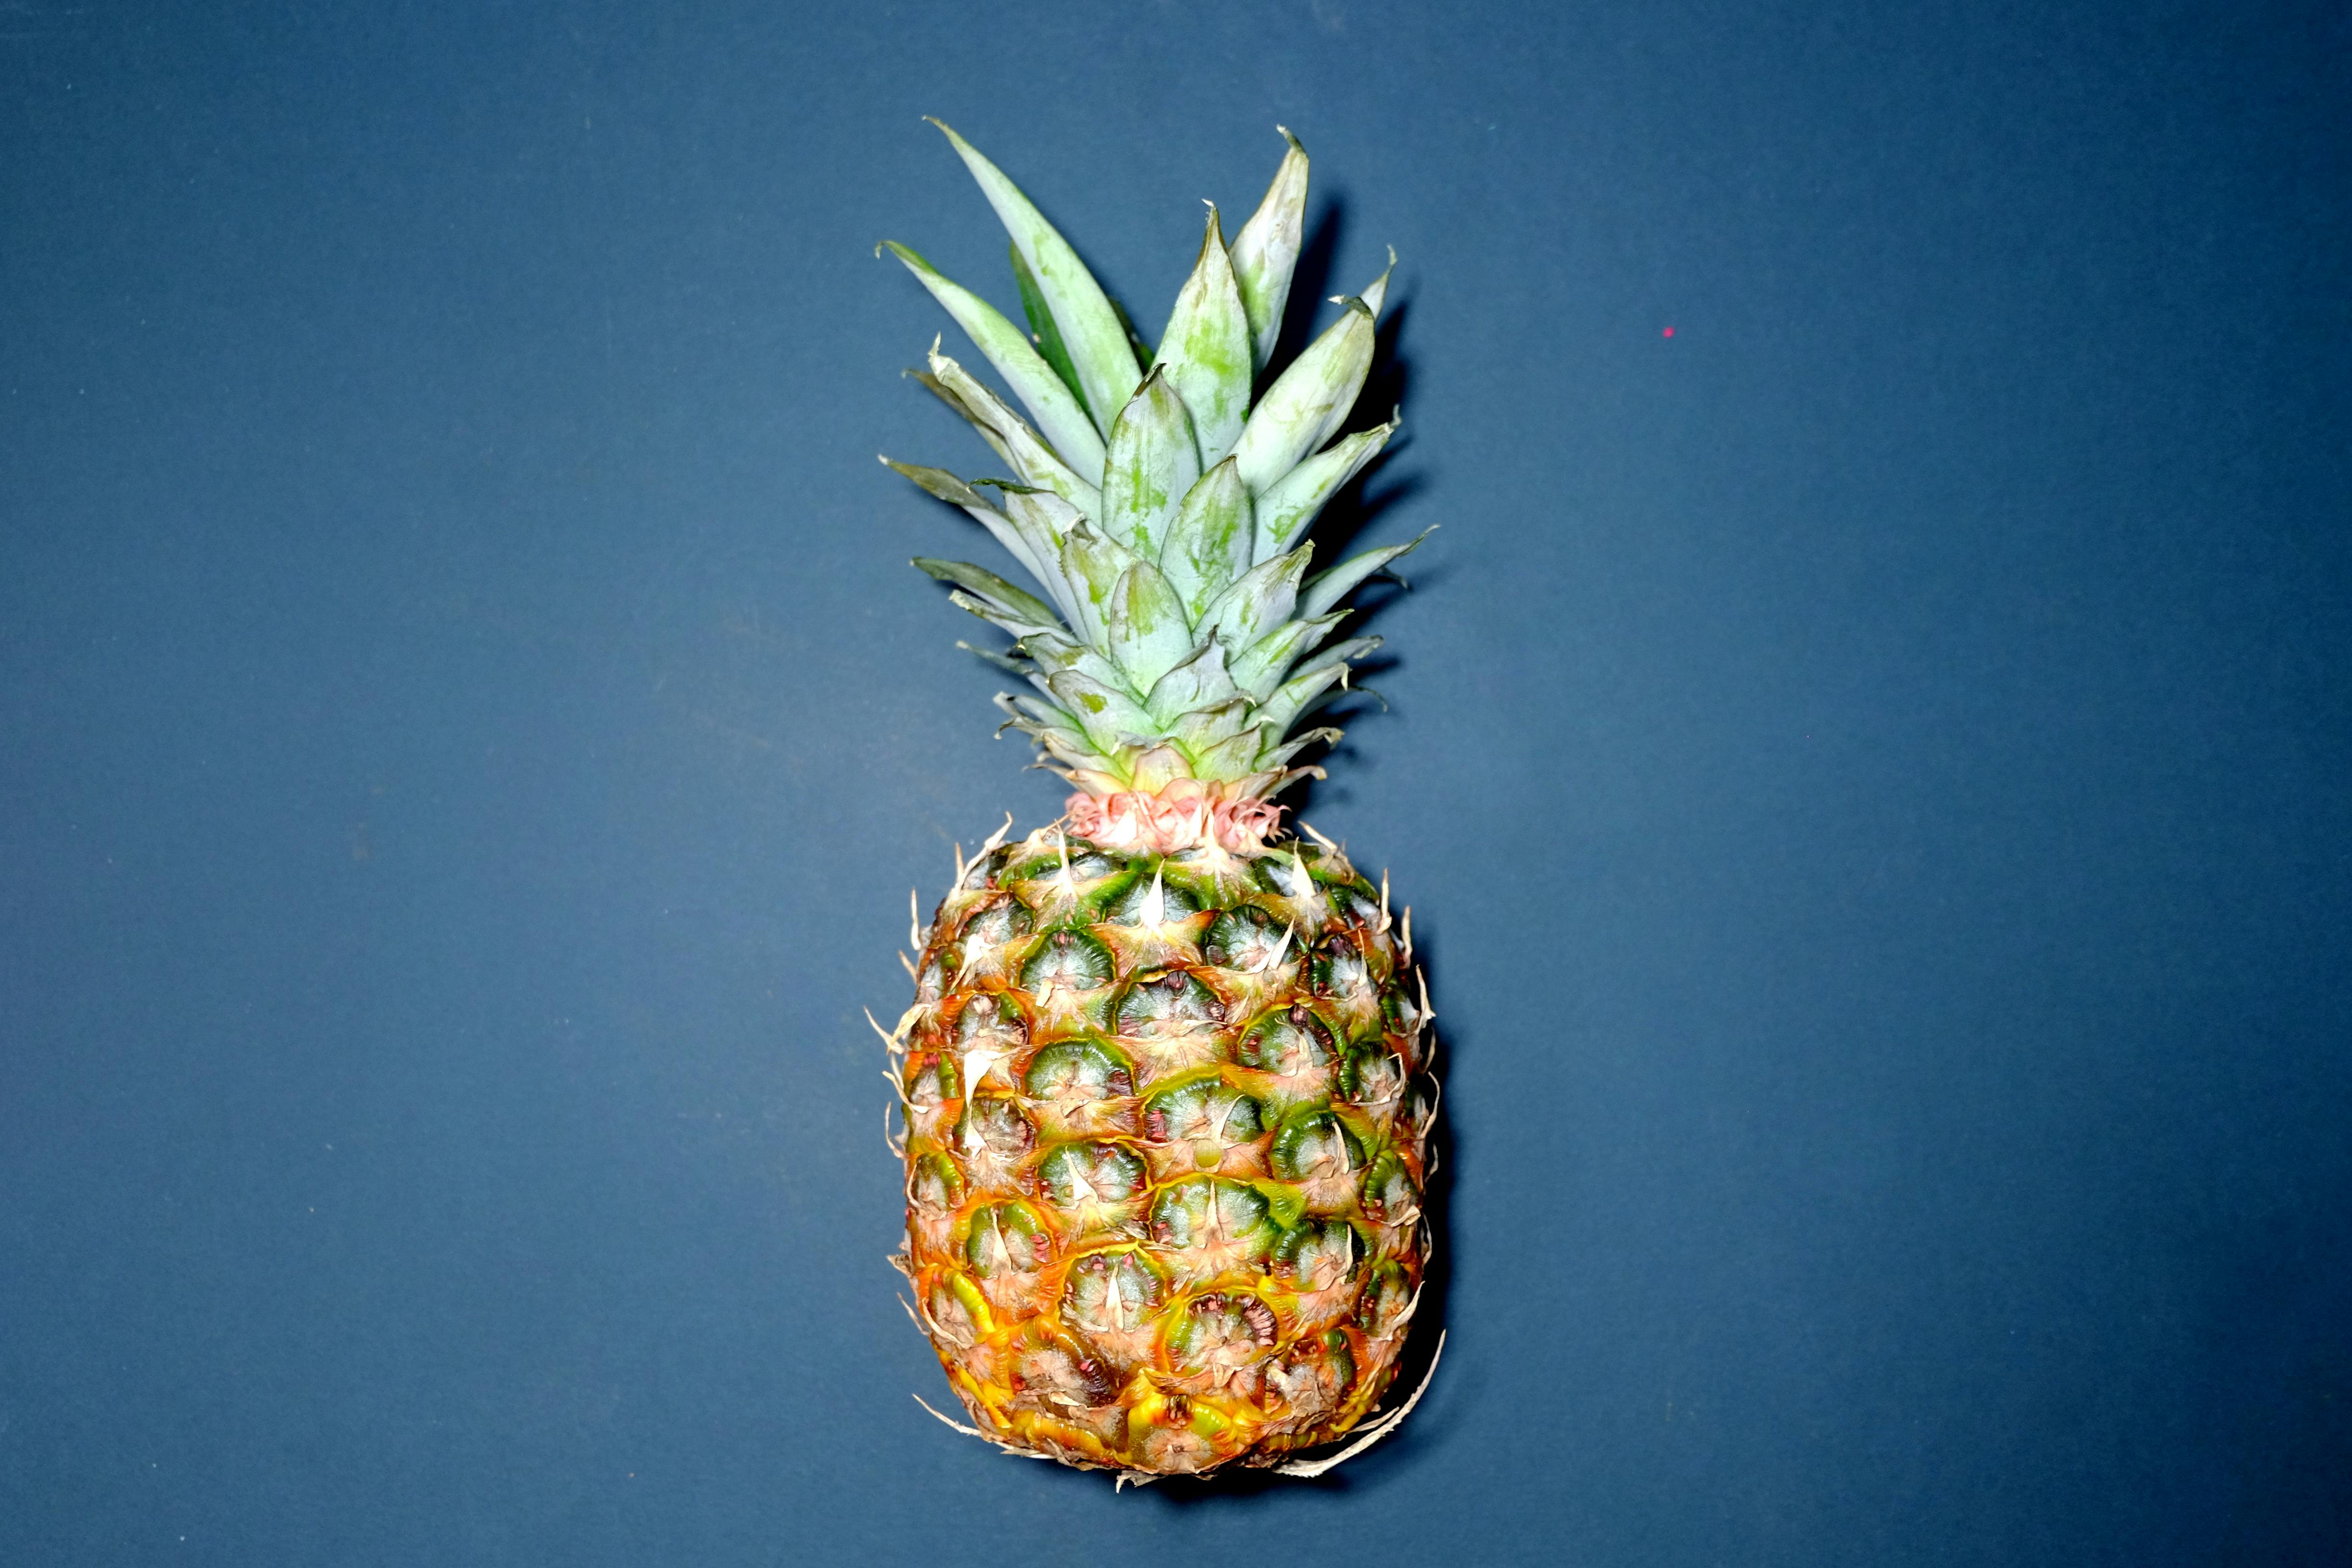 Pineapple Photos Download The BEST Free Pineapple Stock Photos  HD Images